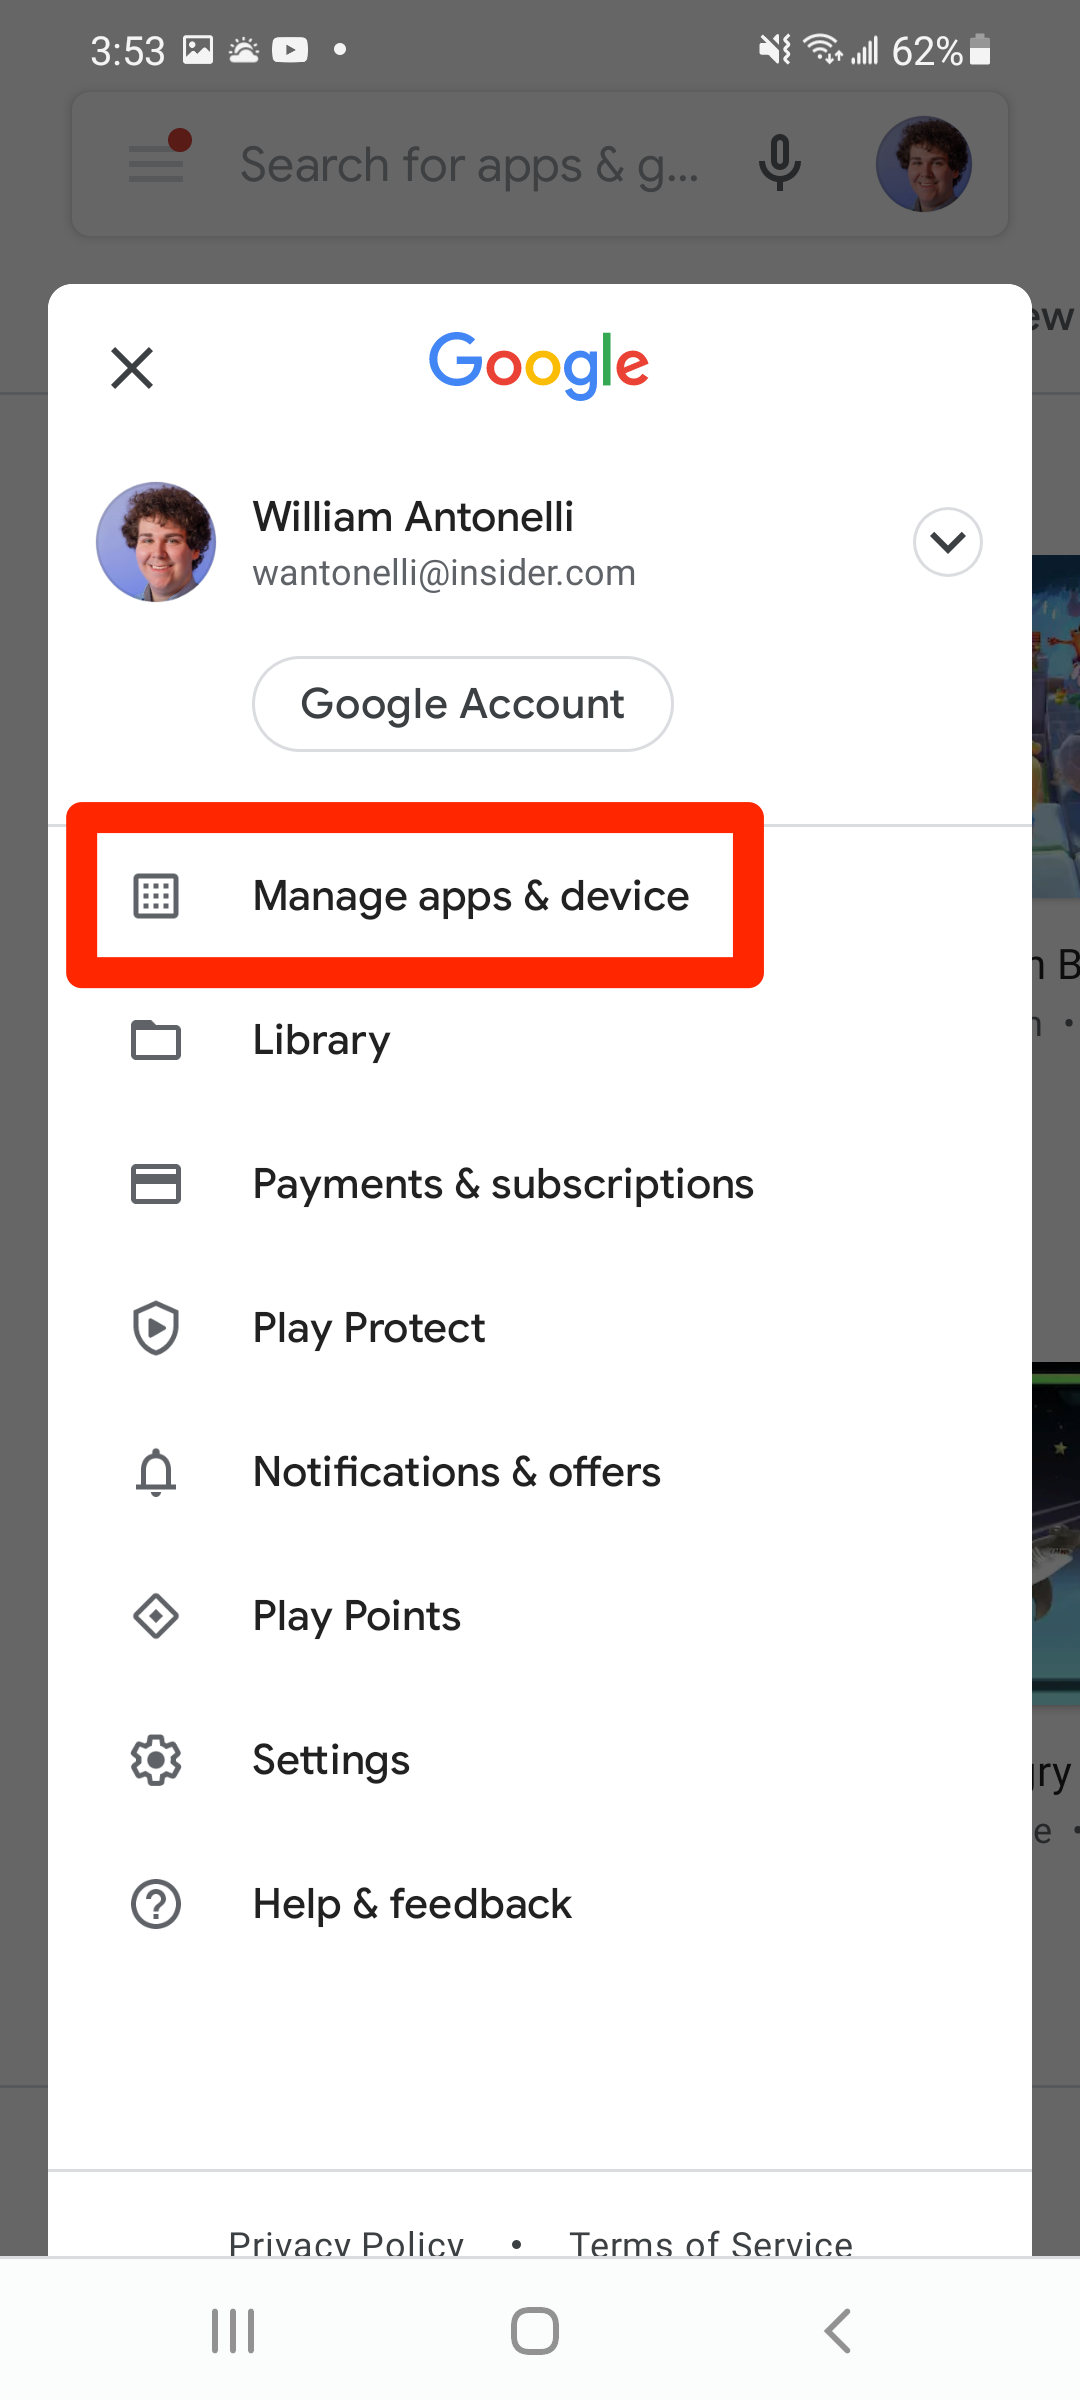 The Google options screen in the Google Play Store, with "Manage apps & device" highlighted.